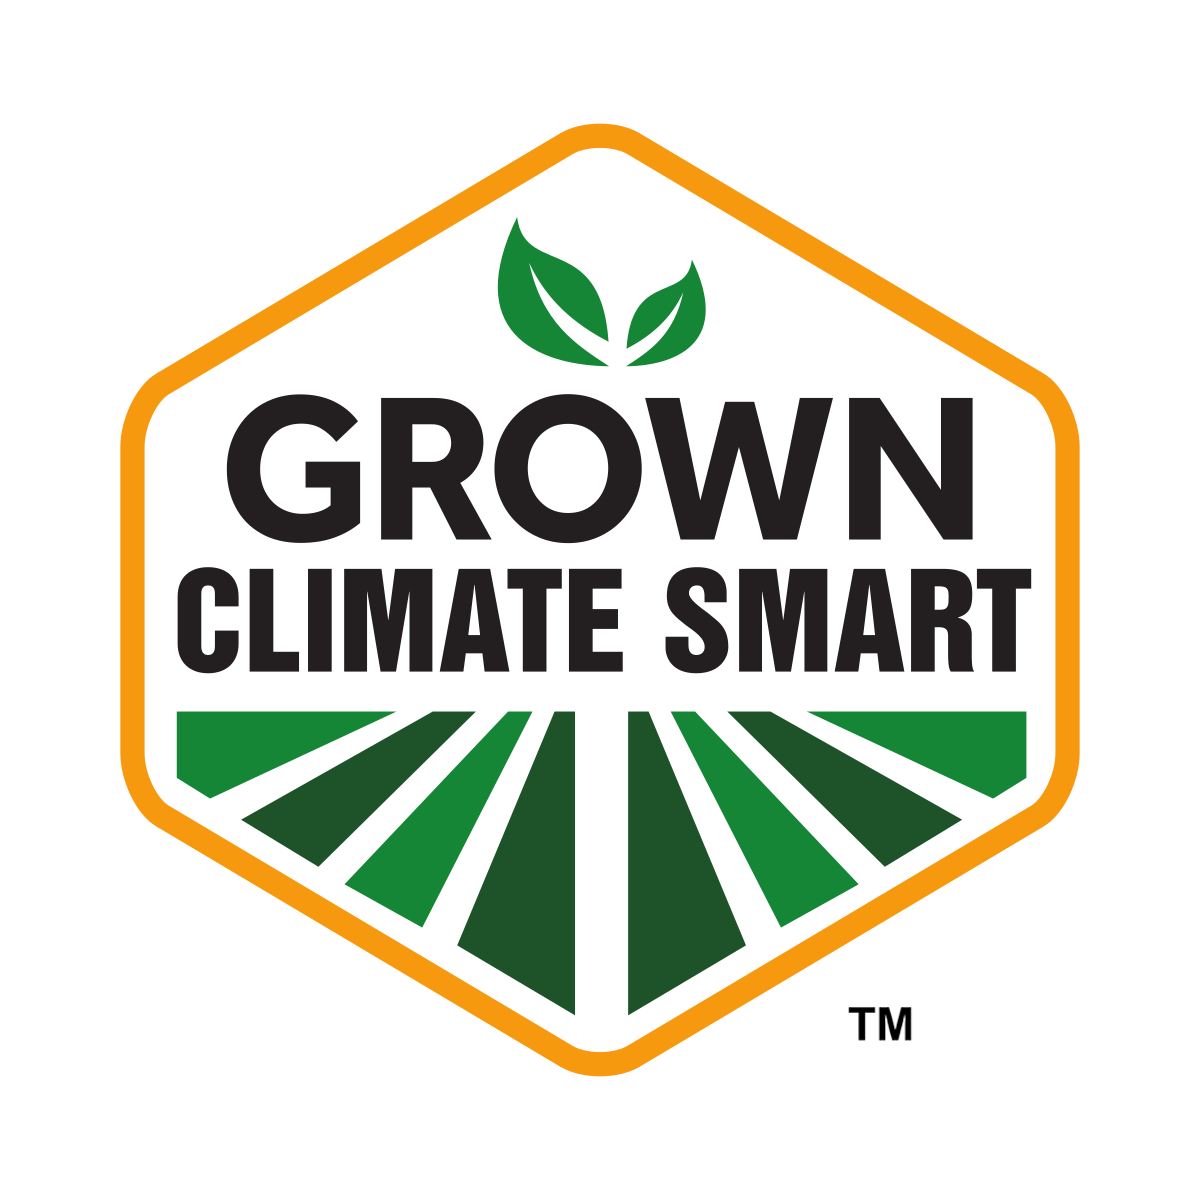 Grown Climate Smart